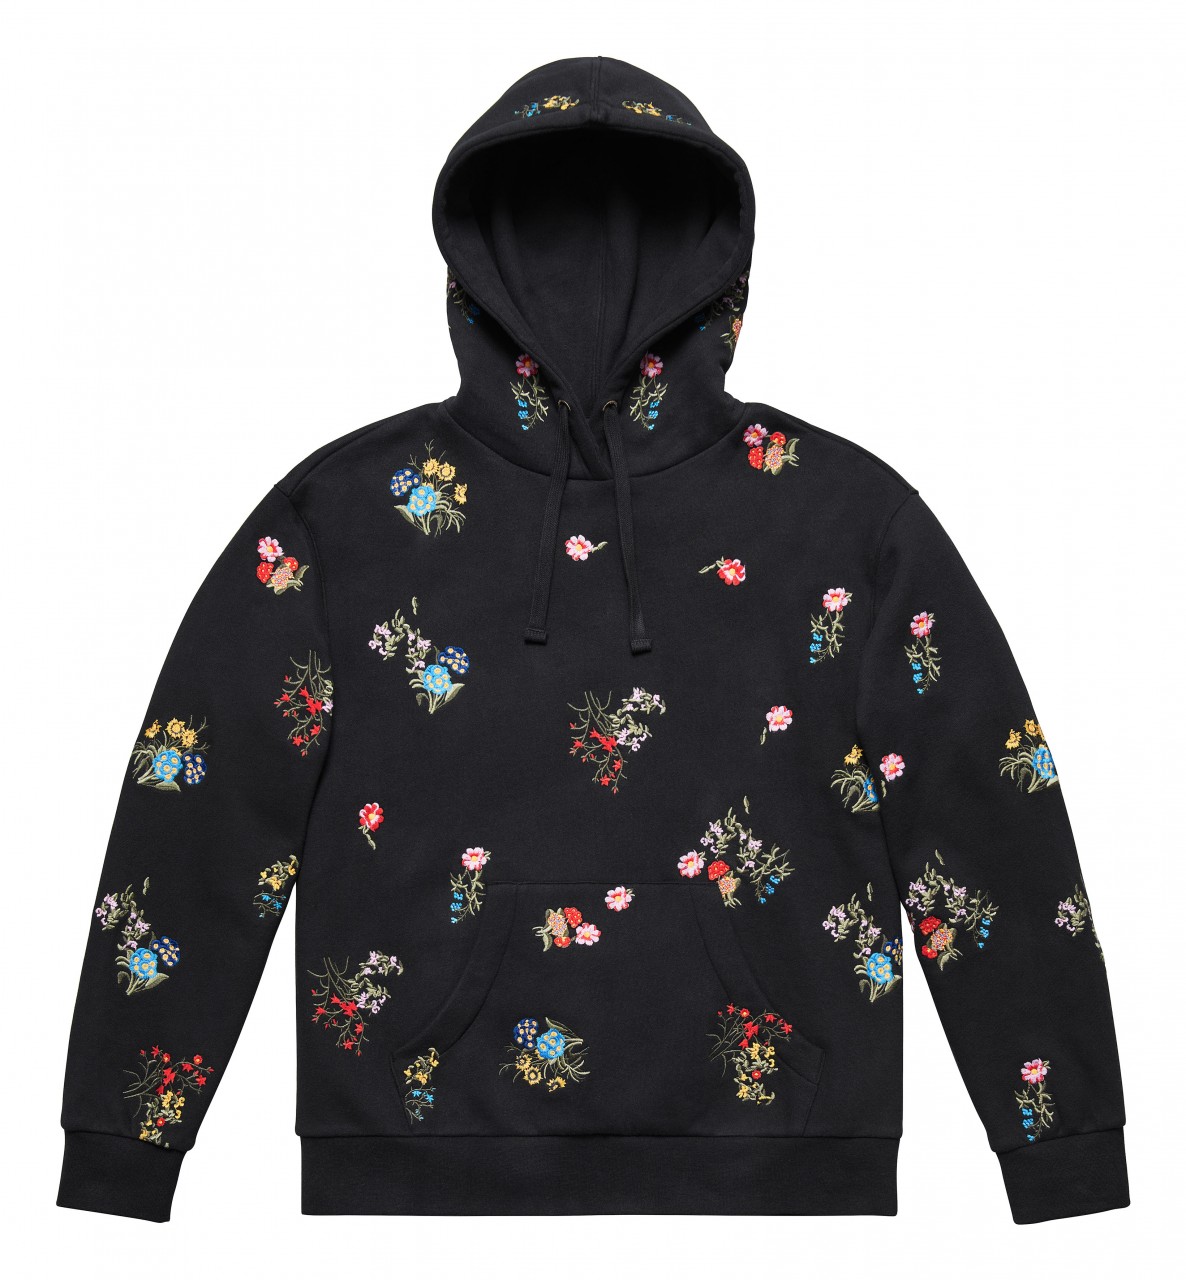 Embroidered Hoodie RM399.00